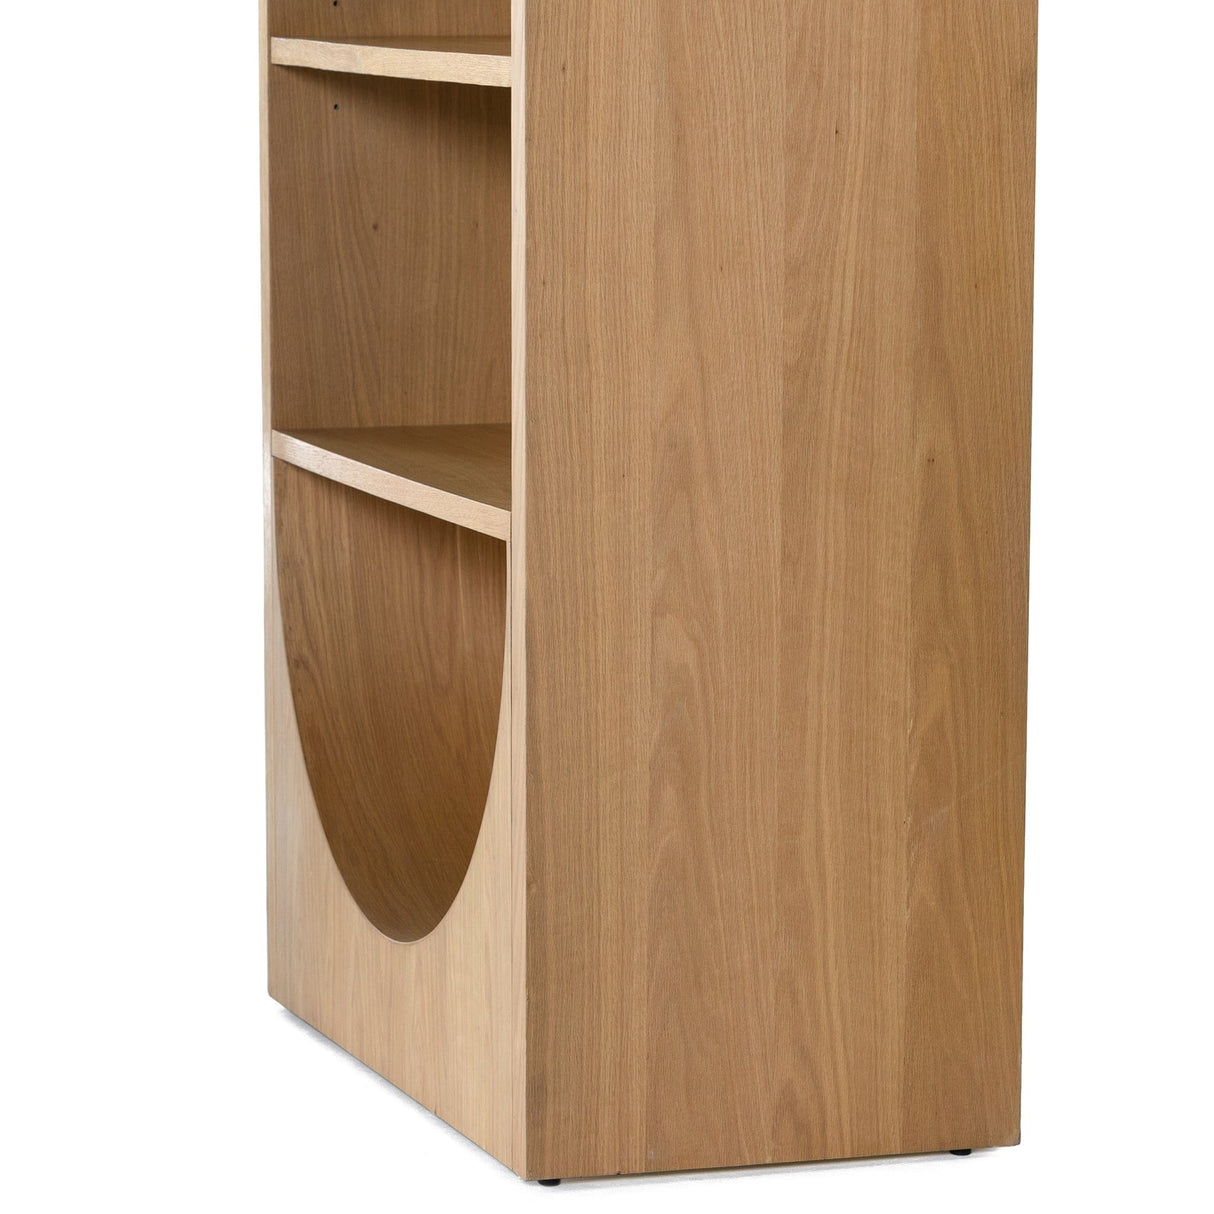 Four Hands Higgs Bookcase Furniture four-hands-225023-002 801542624392